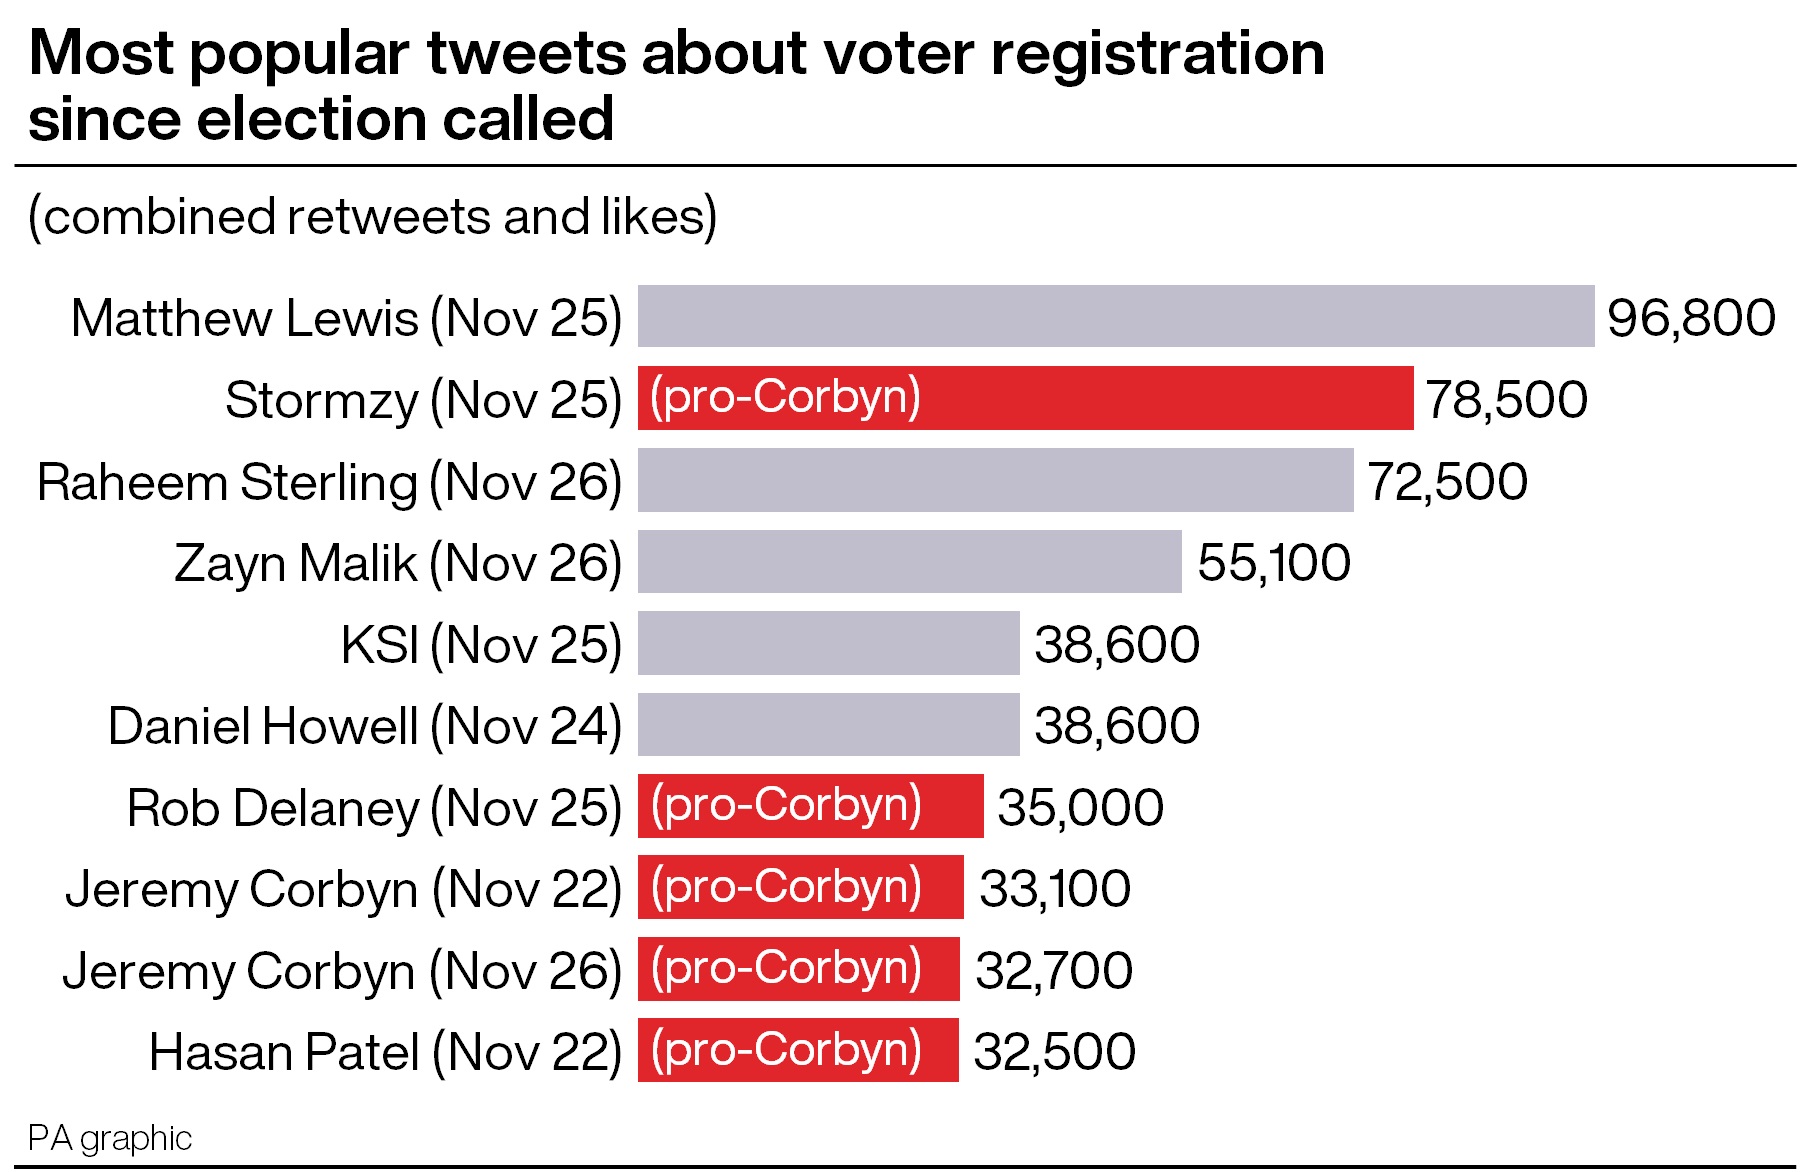 The most popular tweets that included a link to voter registration